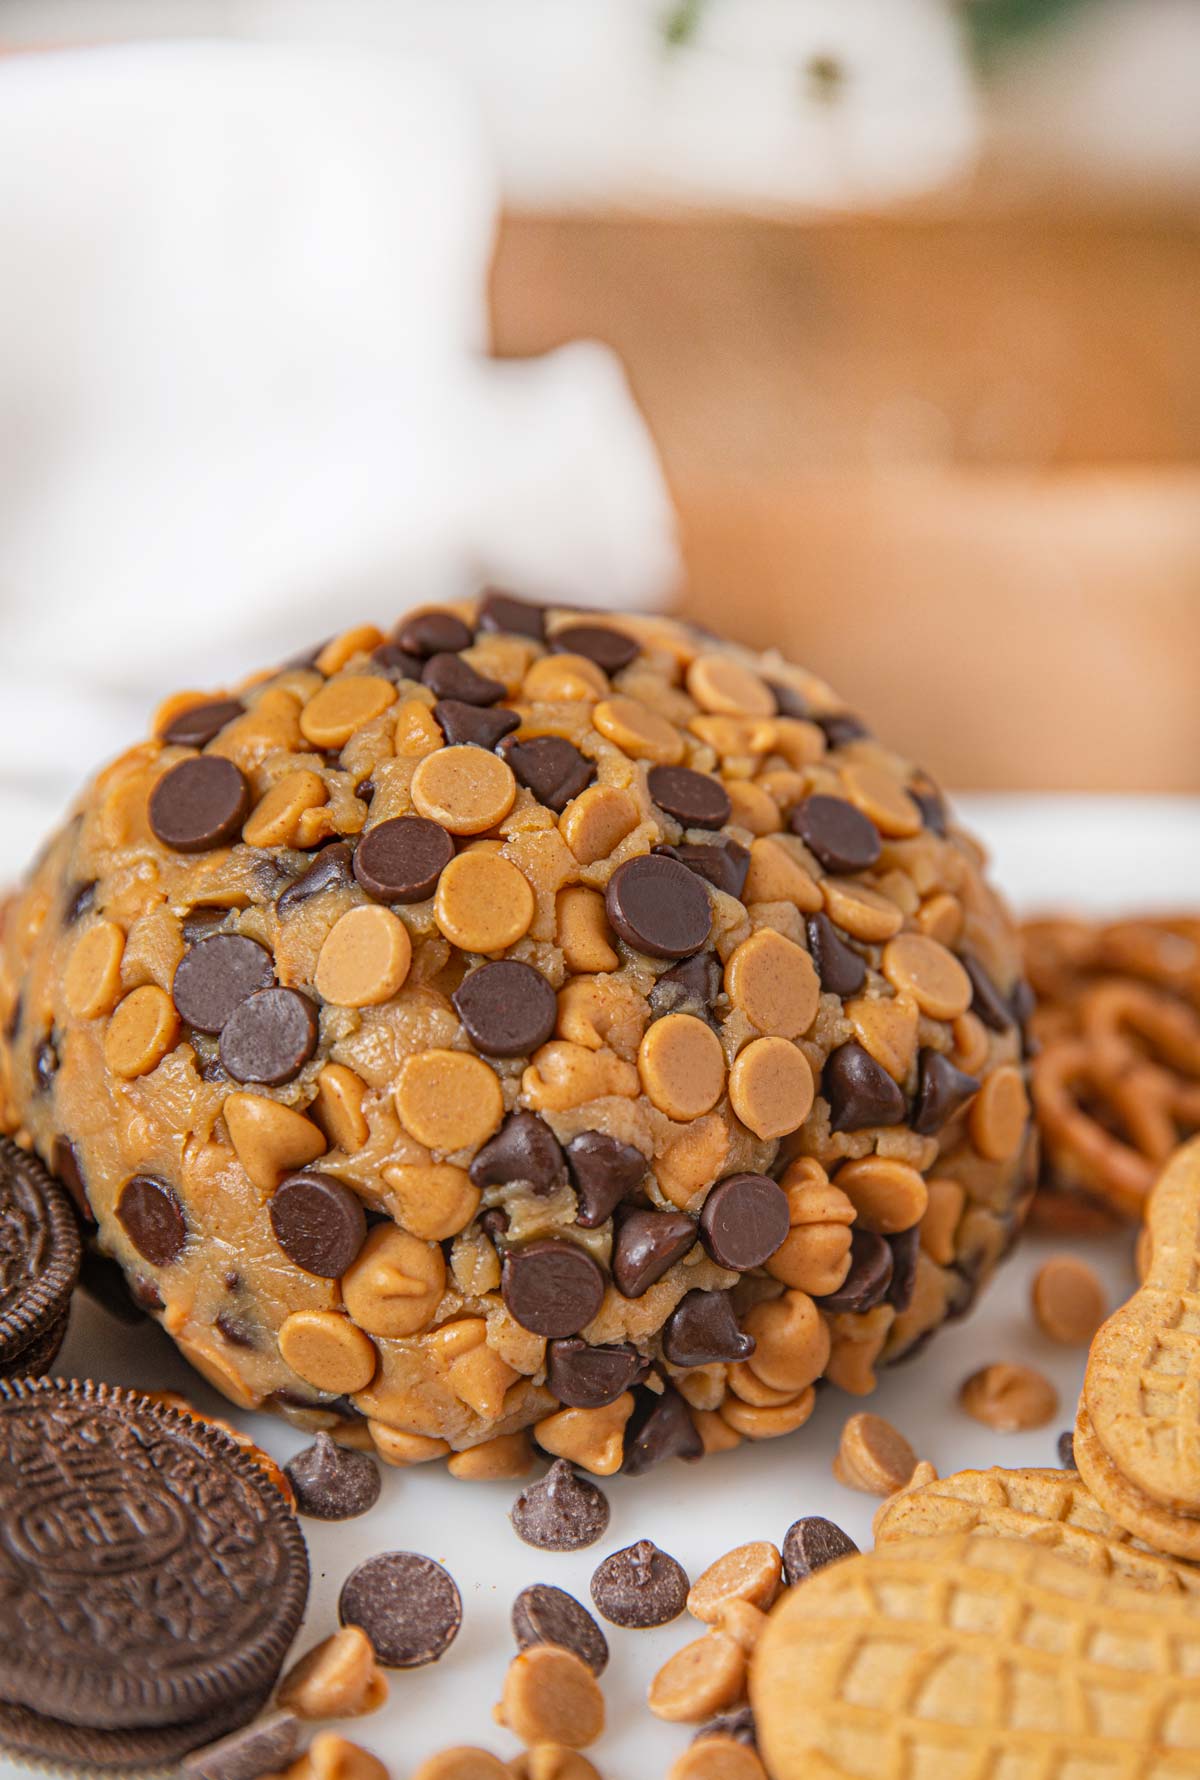 Chocolate Peanut Butter Cheese Ball Dessert on board with crackers and cookies